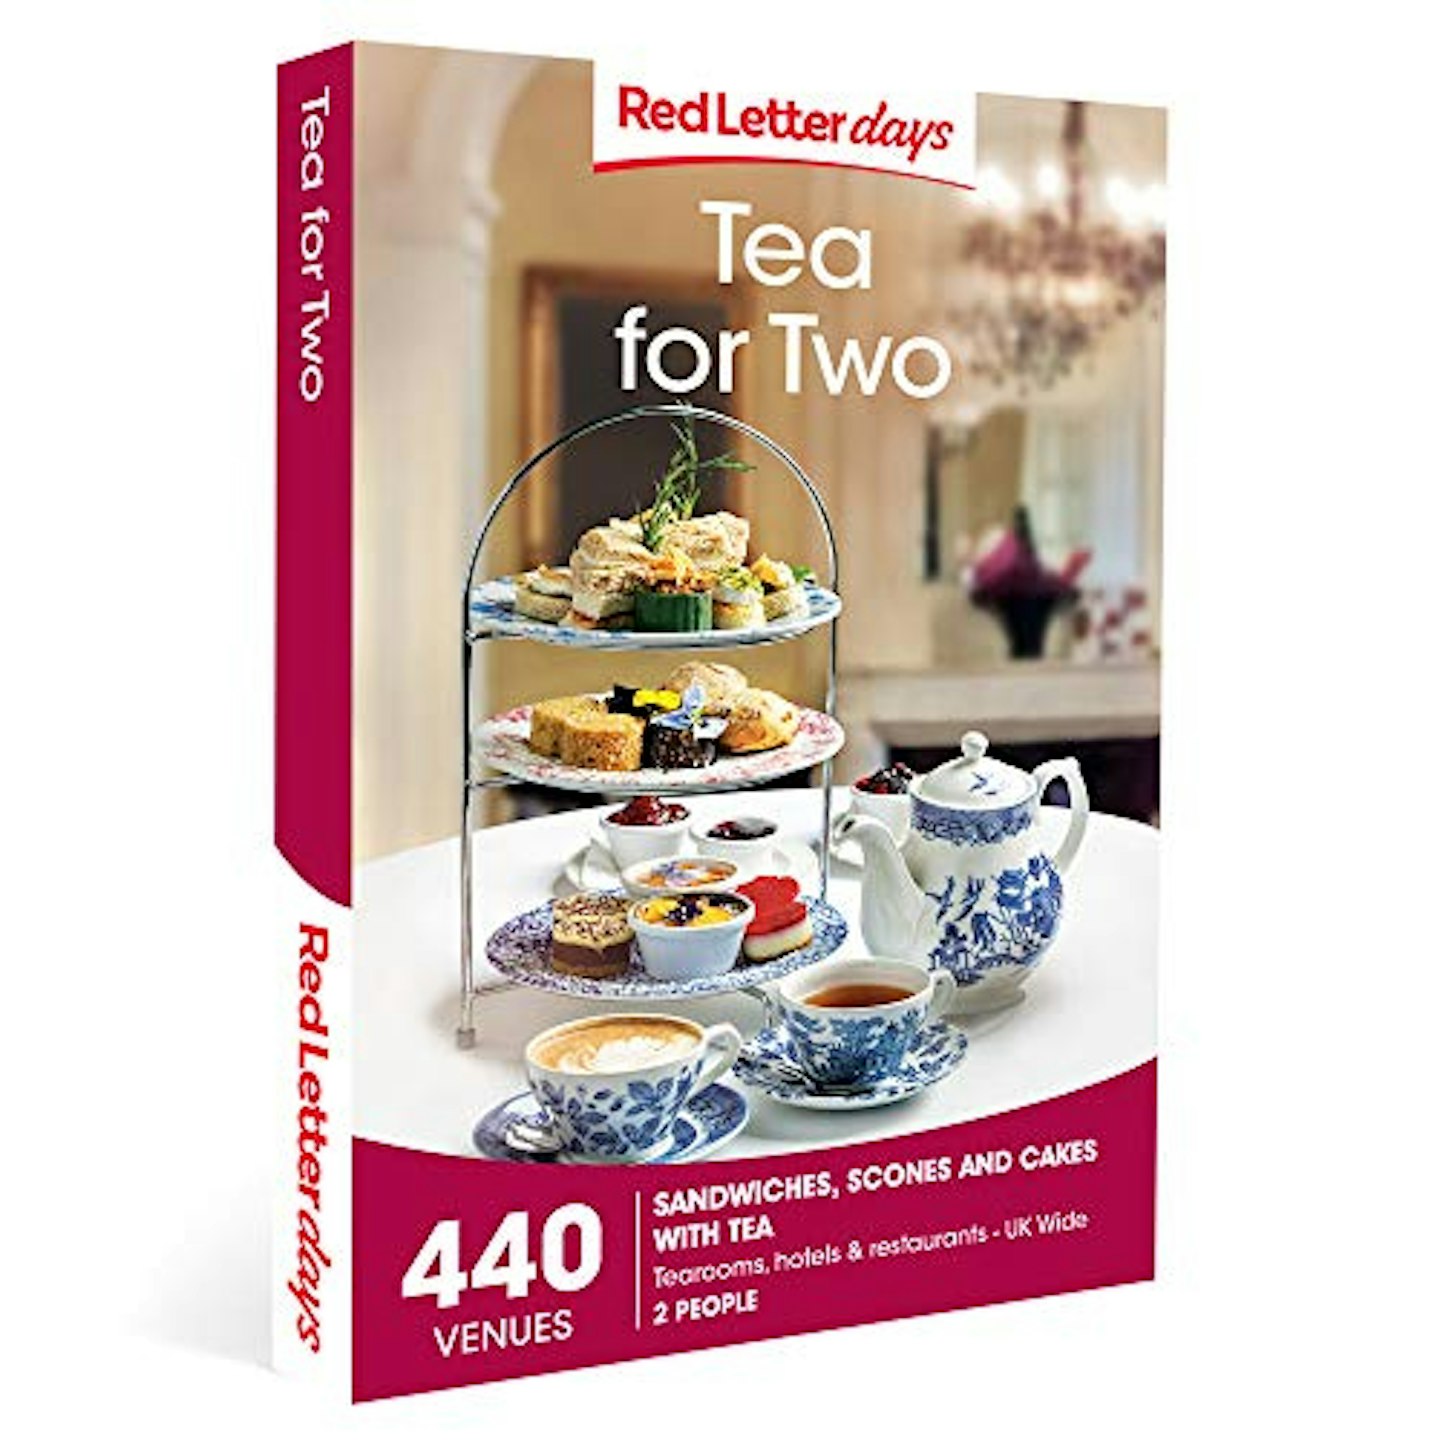 Red Letter Days Tea For Two Voucher